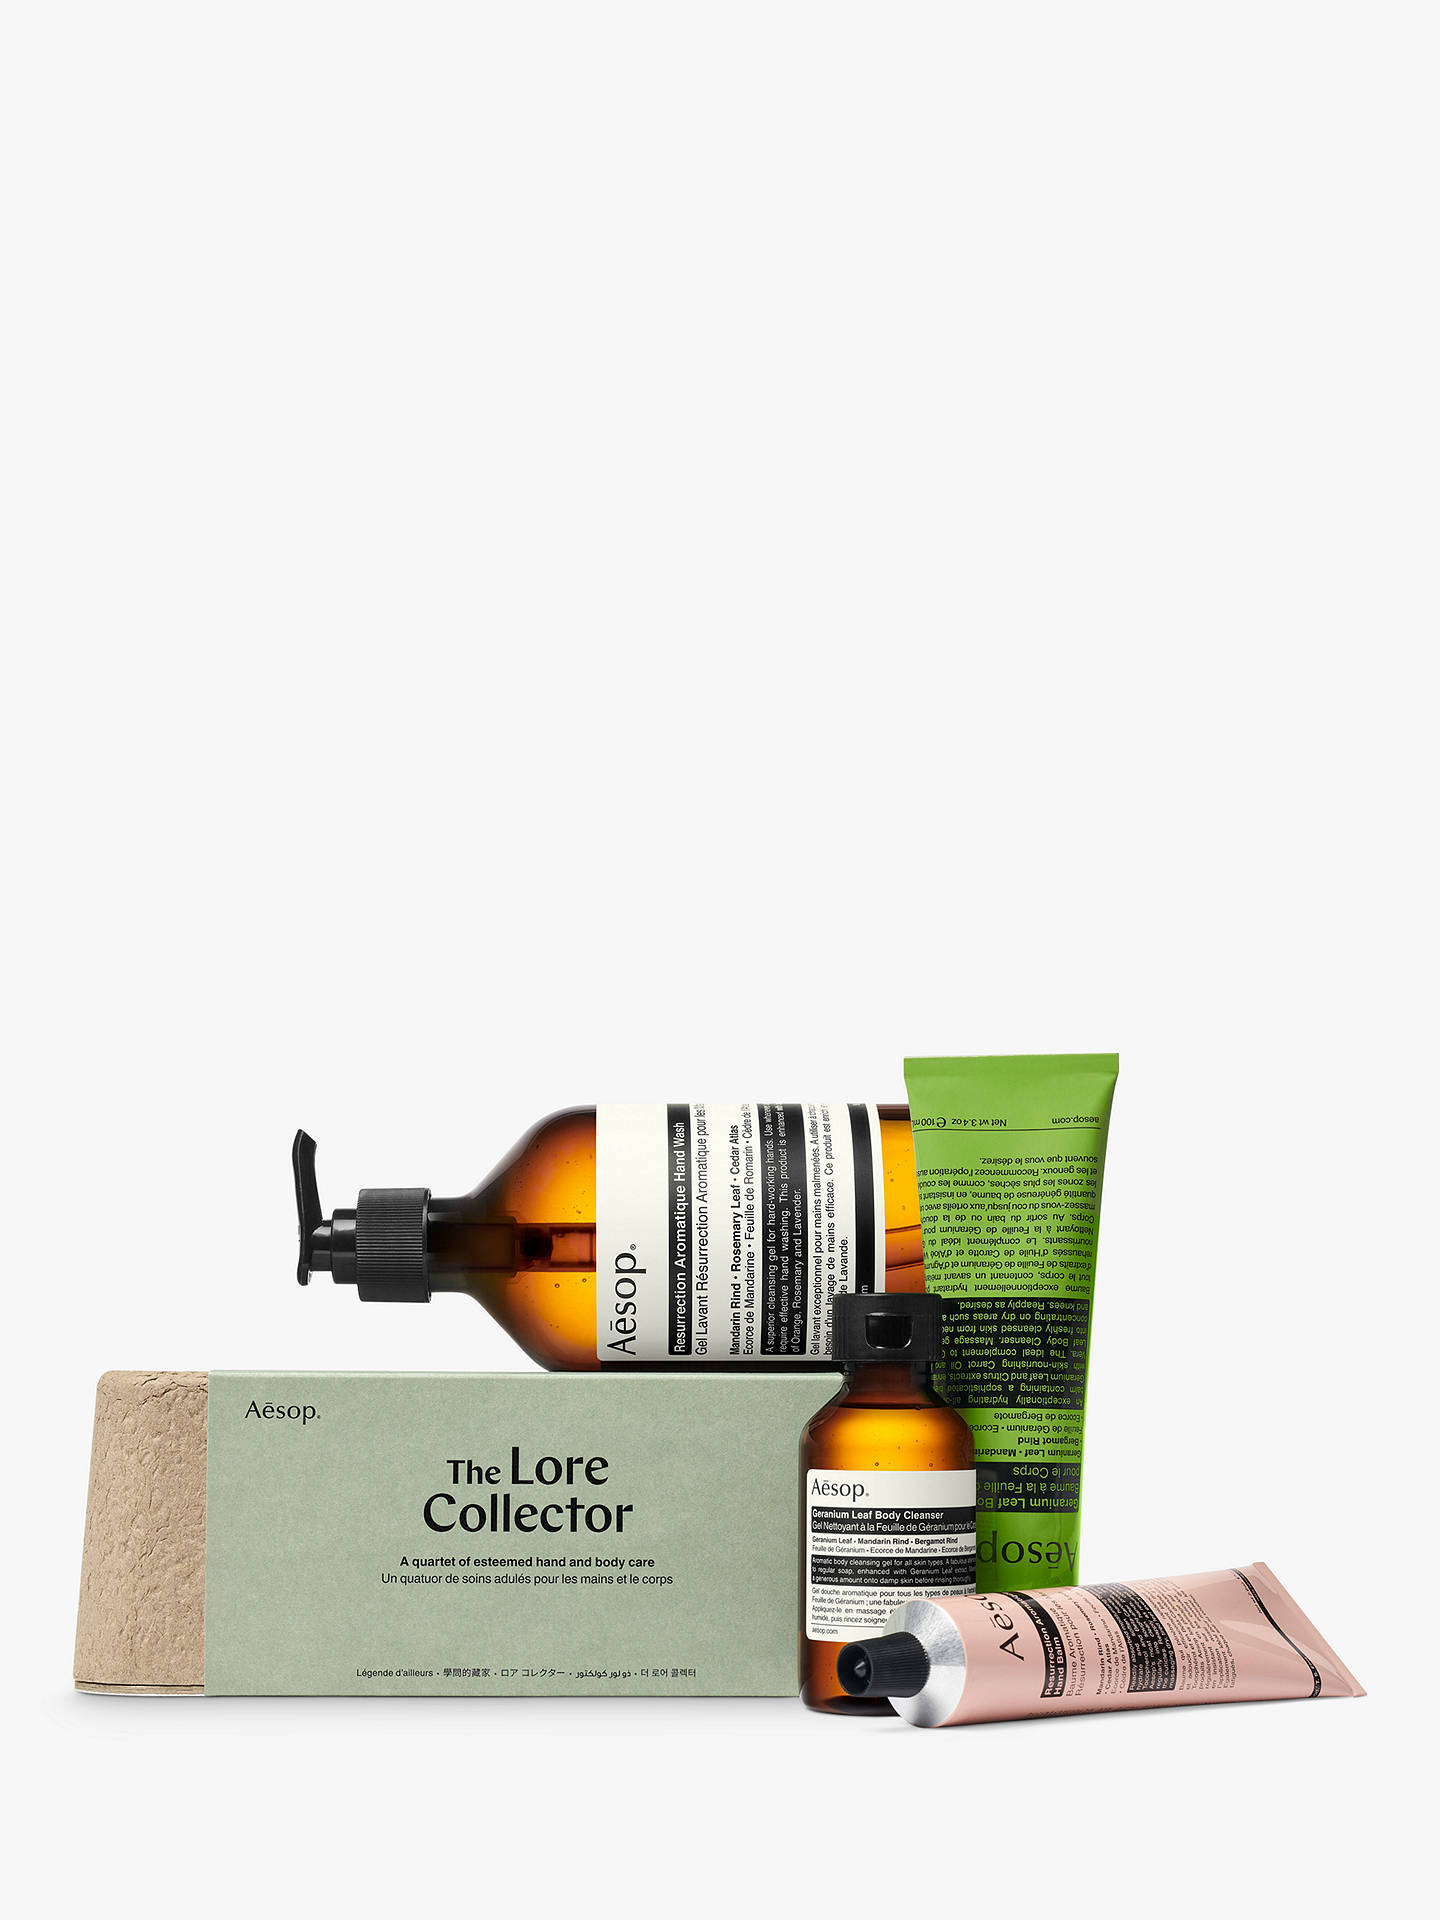 Aesop The Lore Collector Bodycare Gift Set at John Lewis